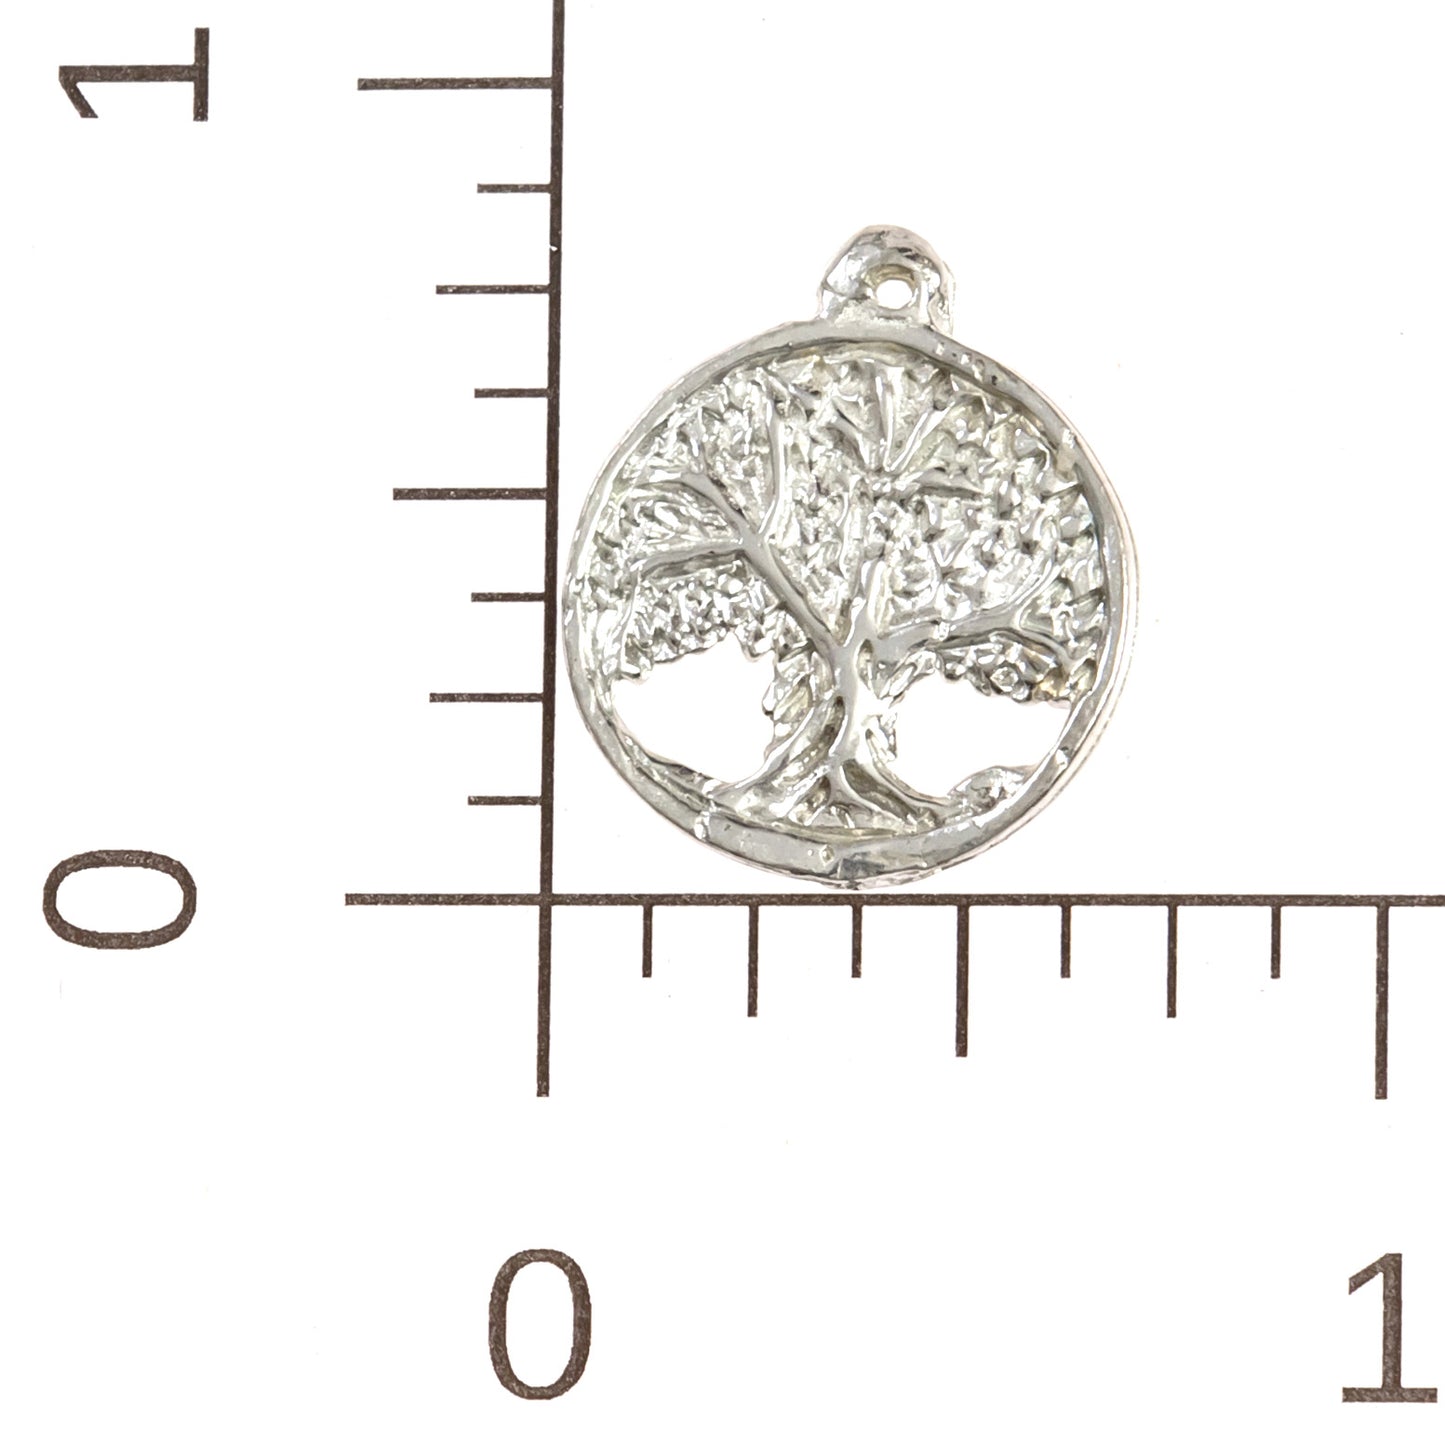 Tree of Life Jewelry - Earrings - Necklace - Pendant